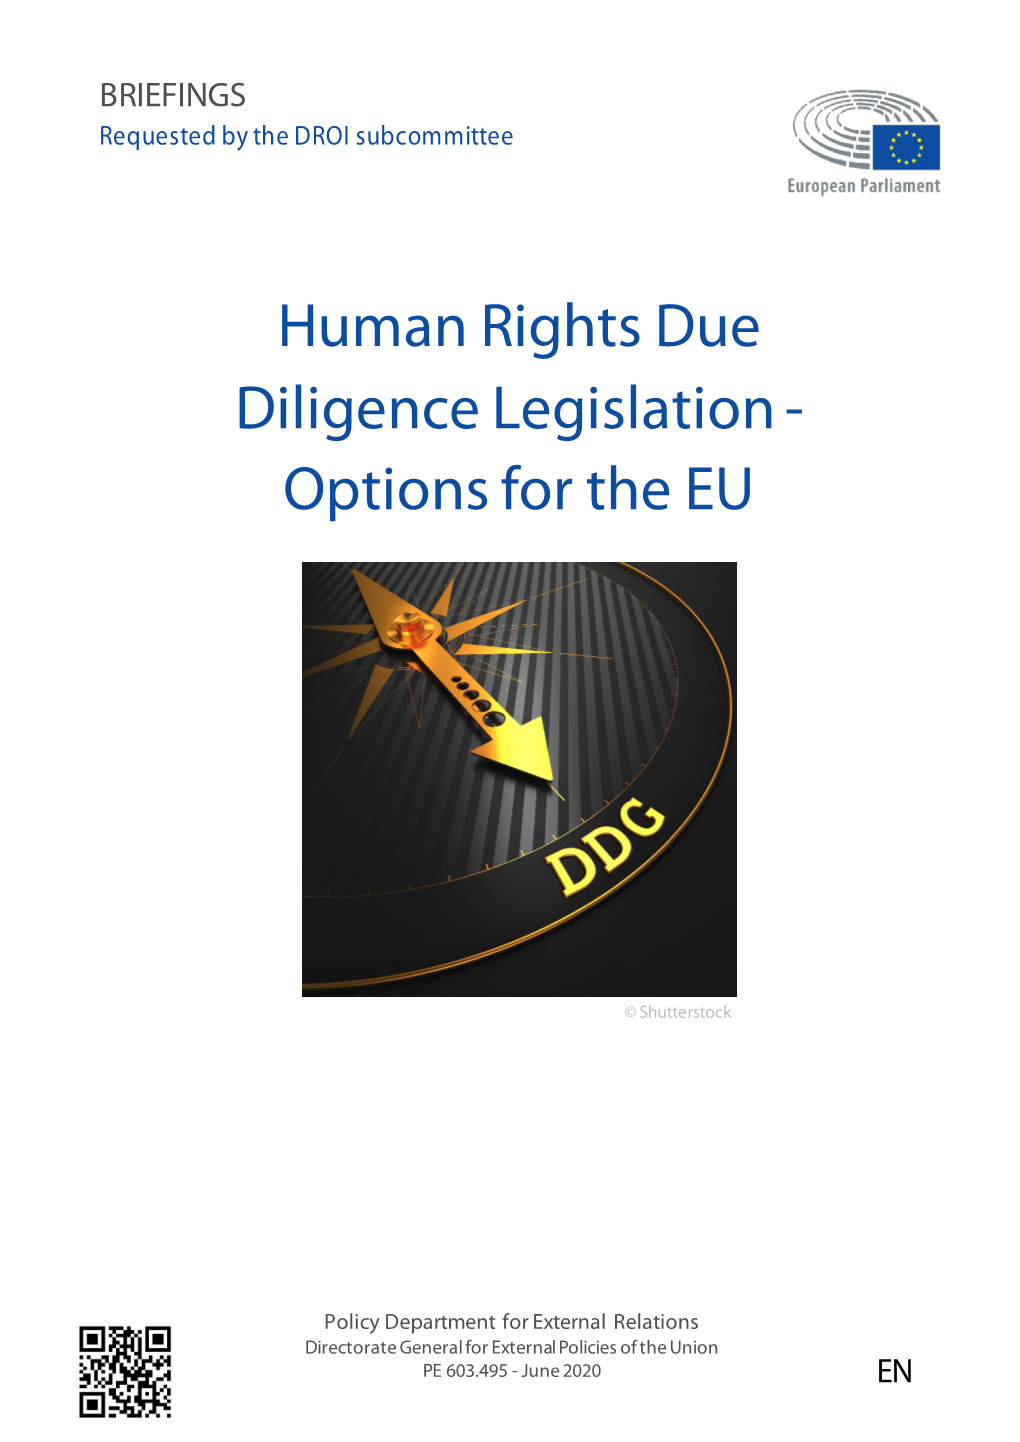 Human Rights Due Diligence Legislation - Options for the EU